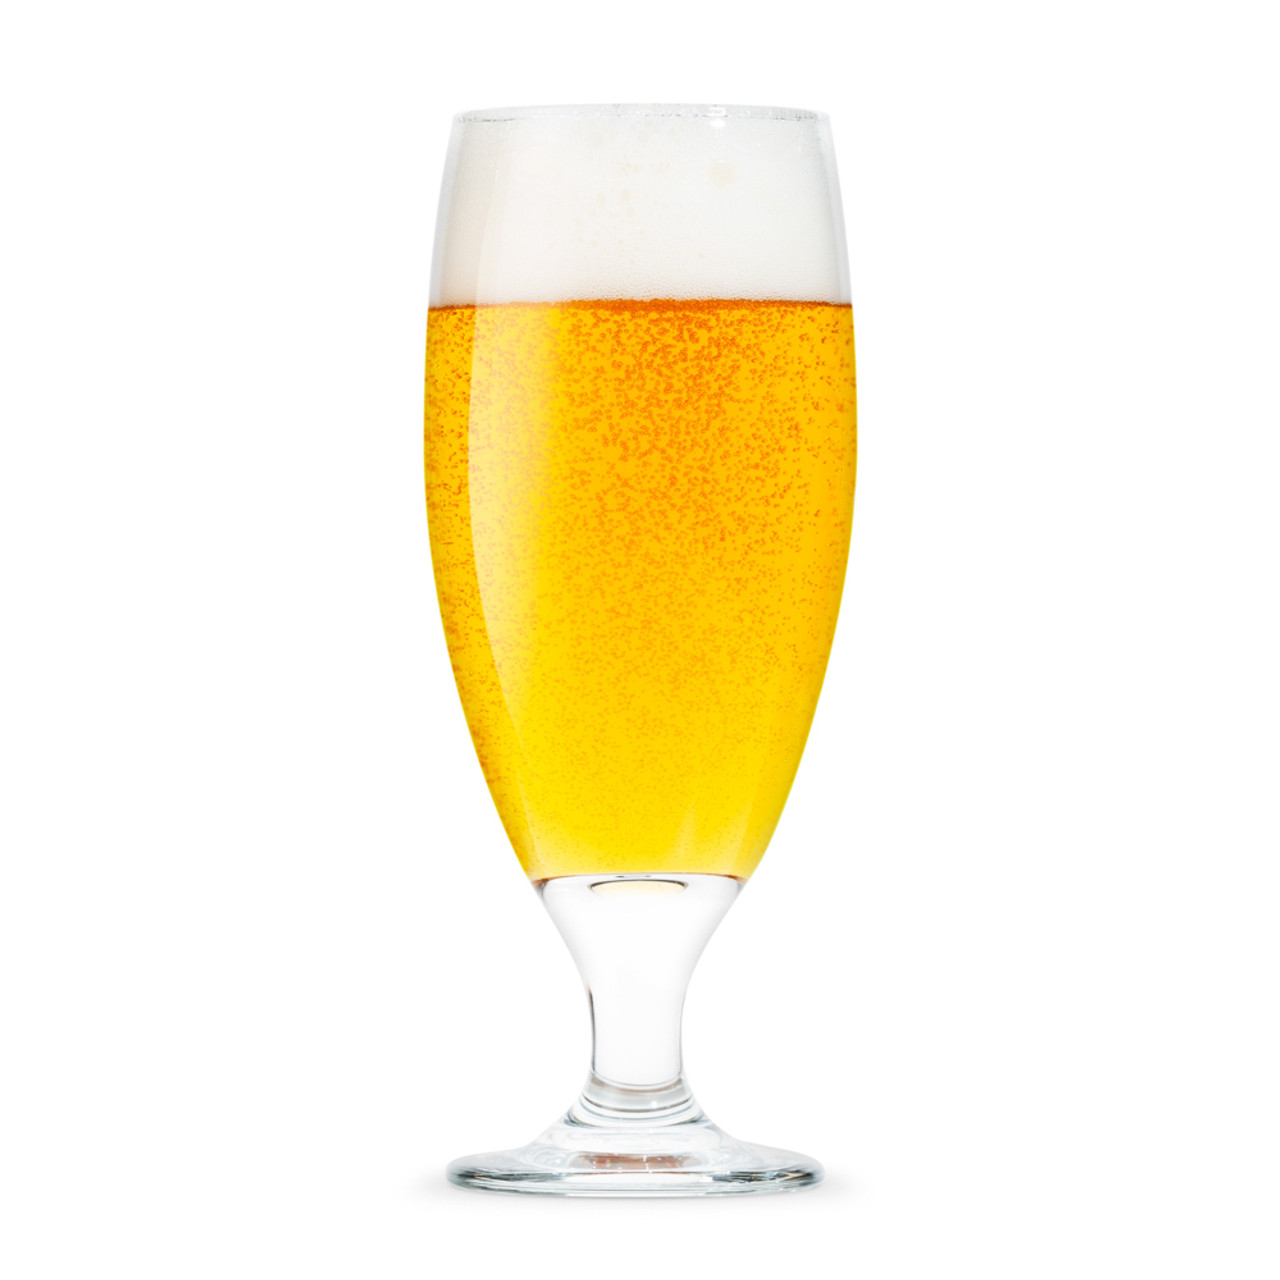 https://cdn11.bigcommerce.com/s-cznxq08r7/images/stencil/1280x1280/products/5487/14754/502249_Libbey_Embassy_Stemmed_Pilsner_Beer_Glass_-_16_oz_01__91500.1665773744.jpg?c=1